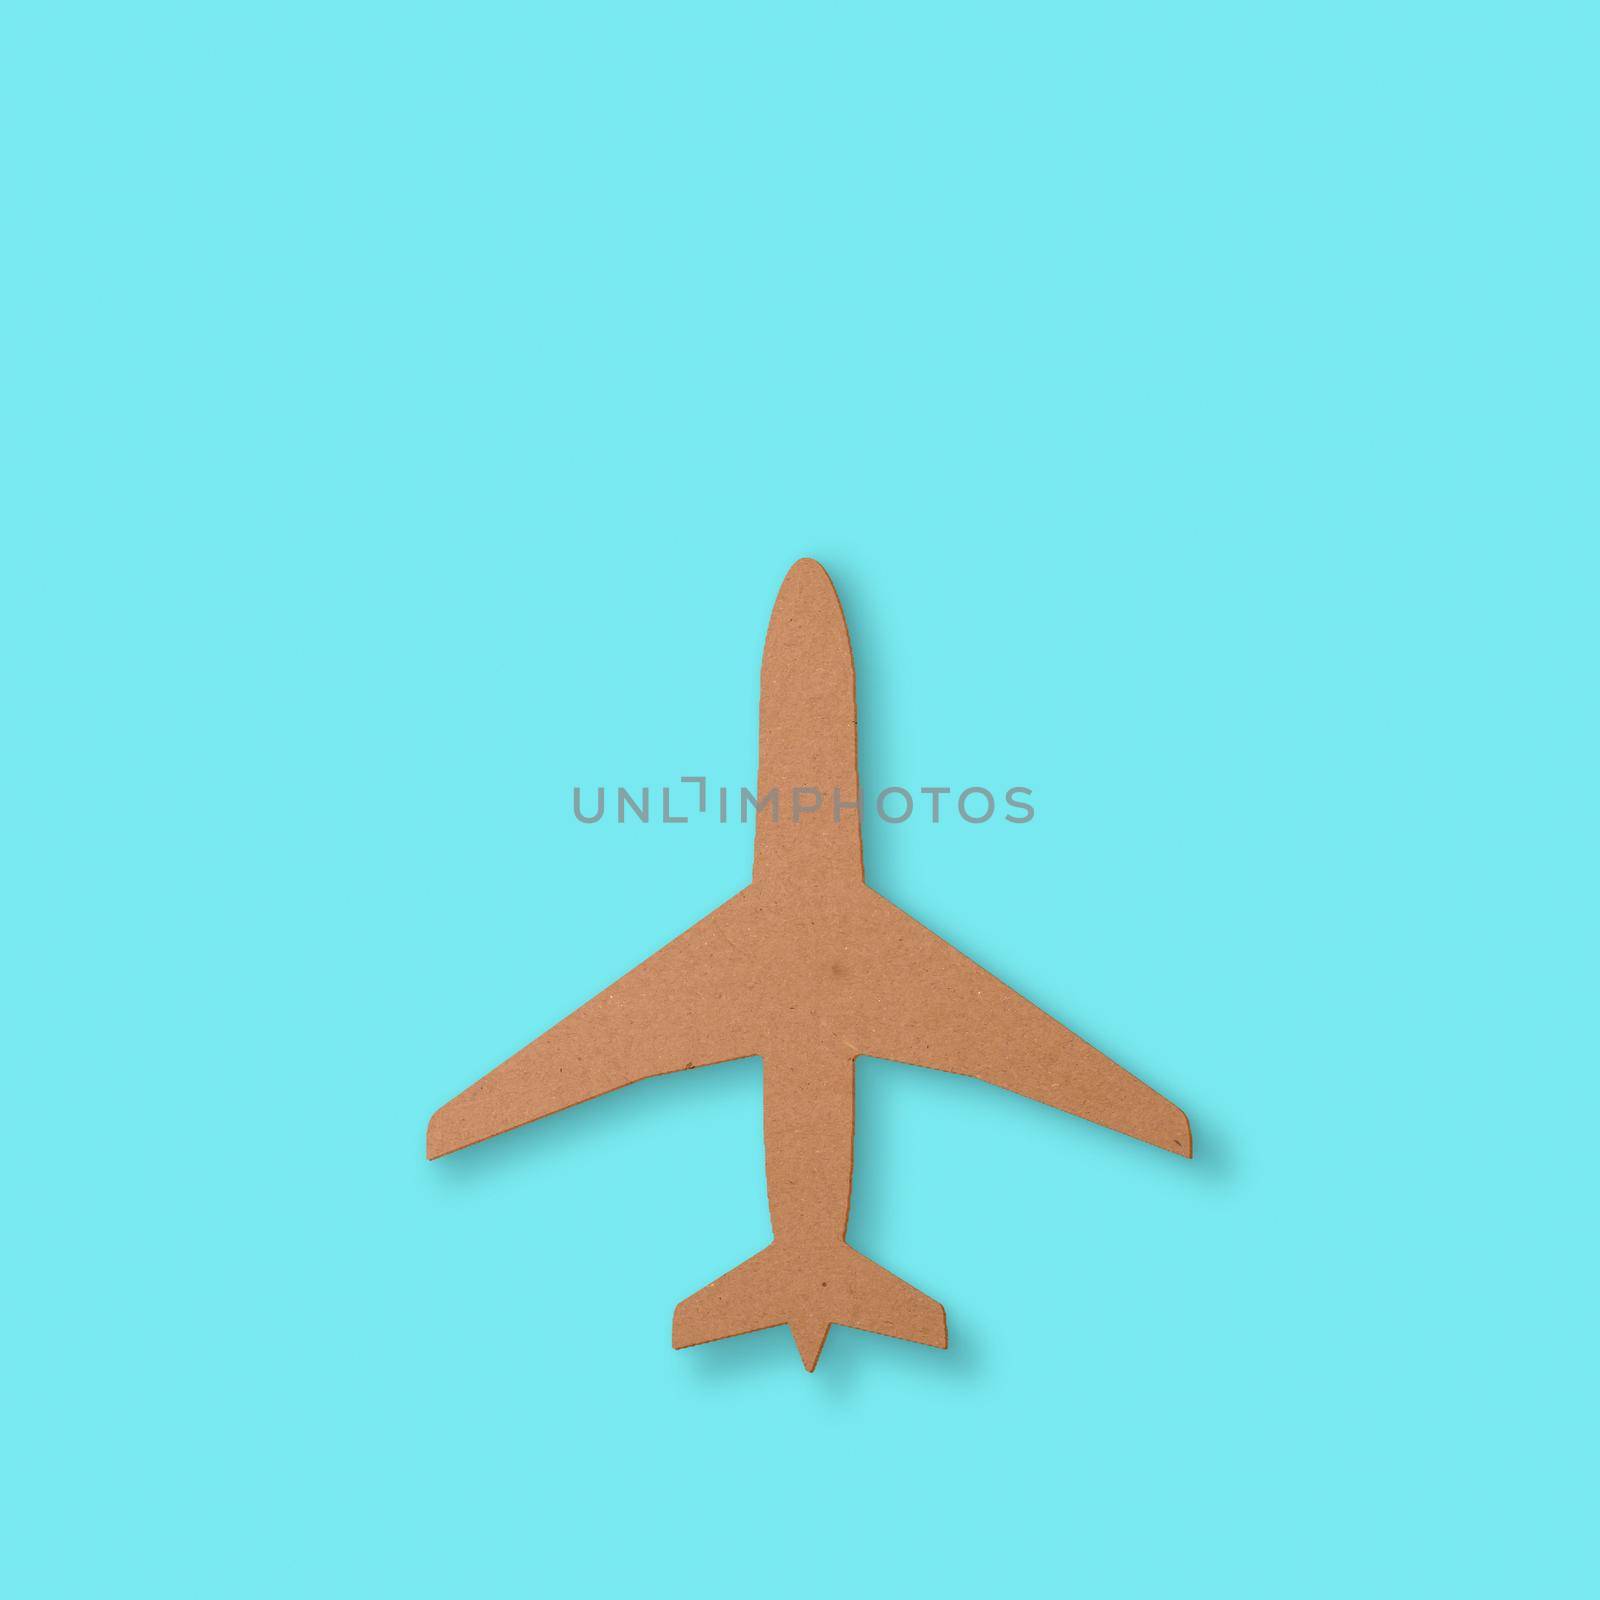 Cutout of an airplane over a blue background by sergii_gnatiuk